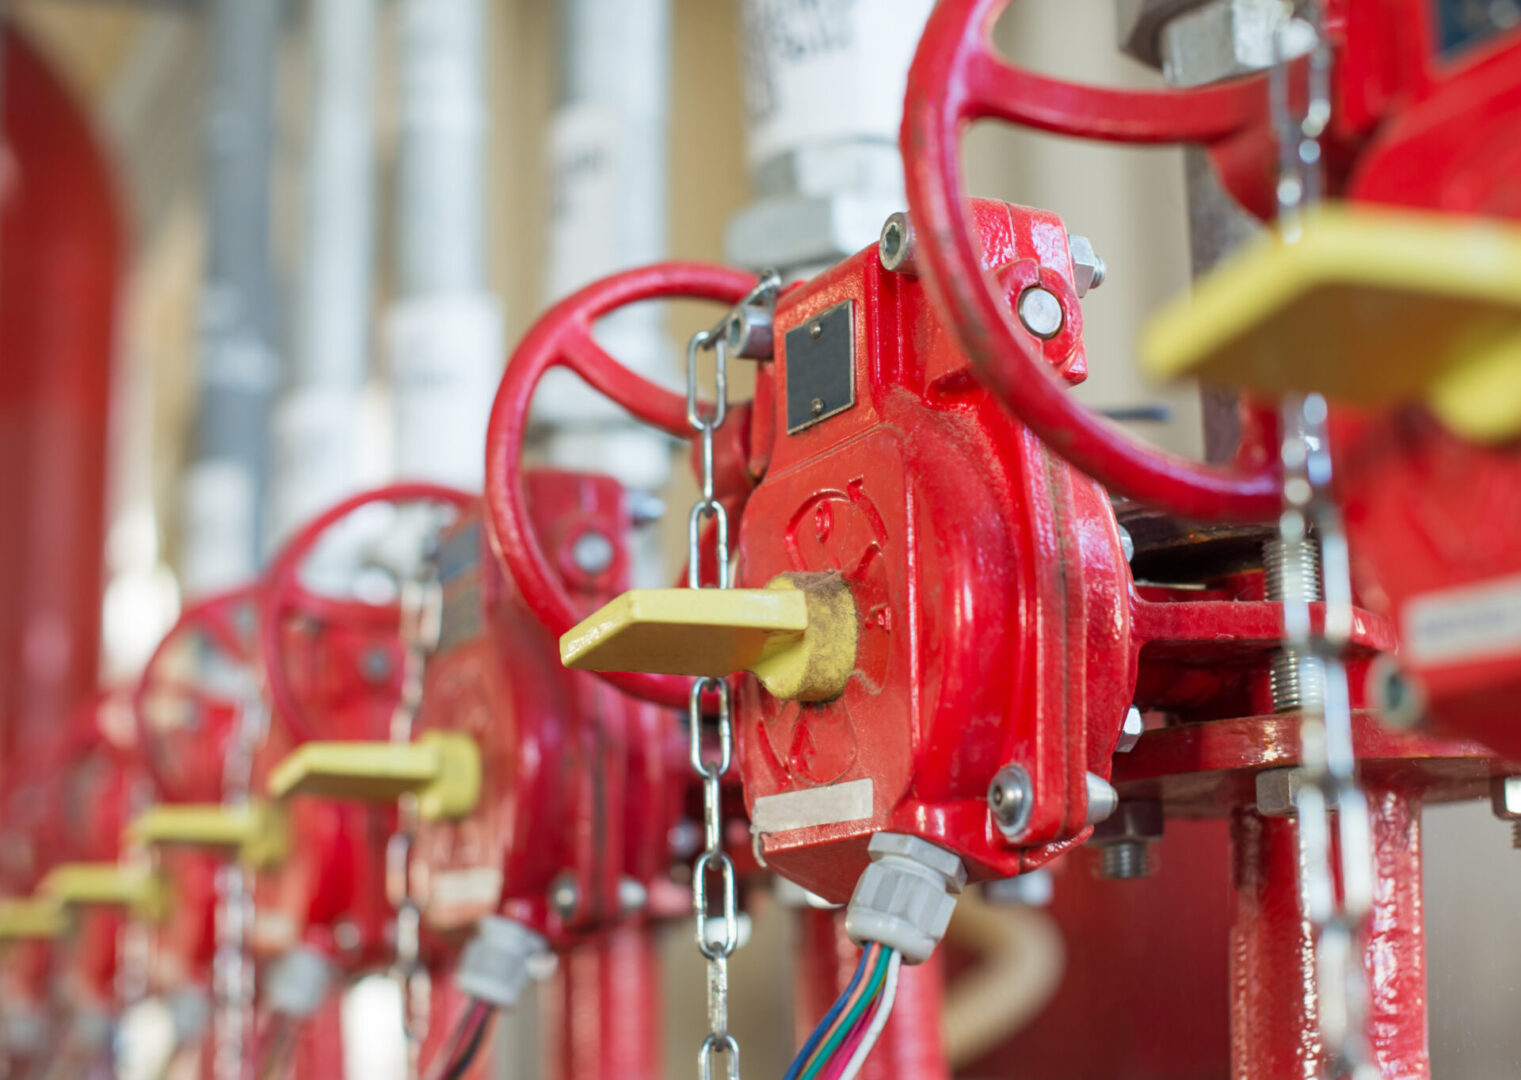 A row of red valves hanging from chains.